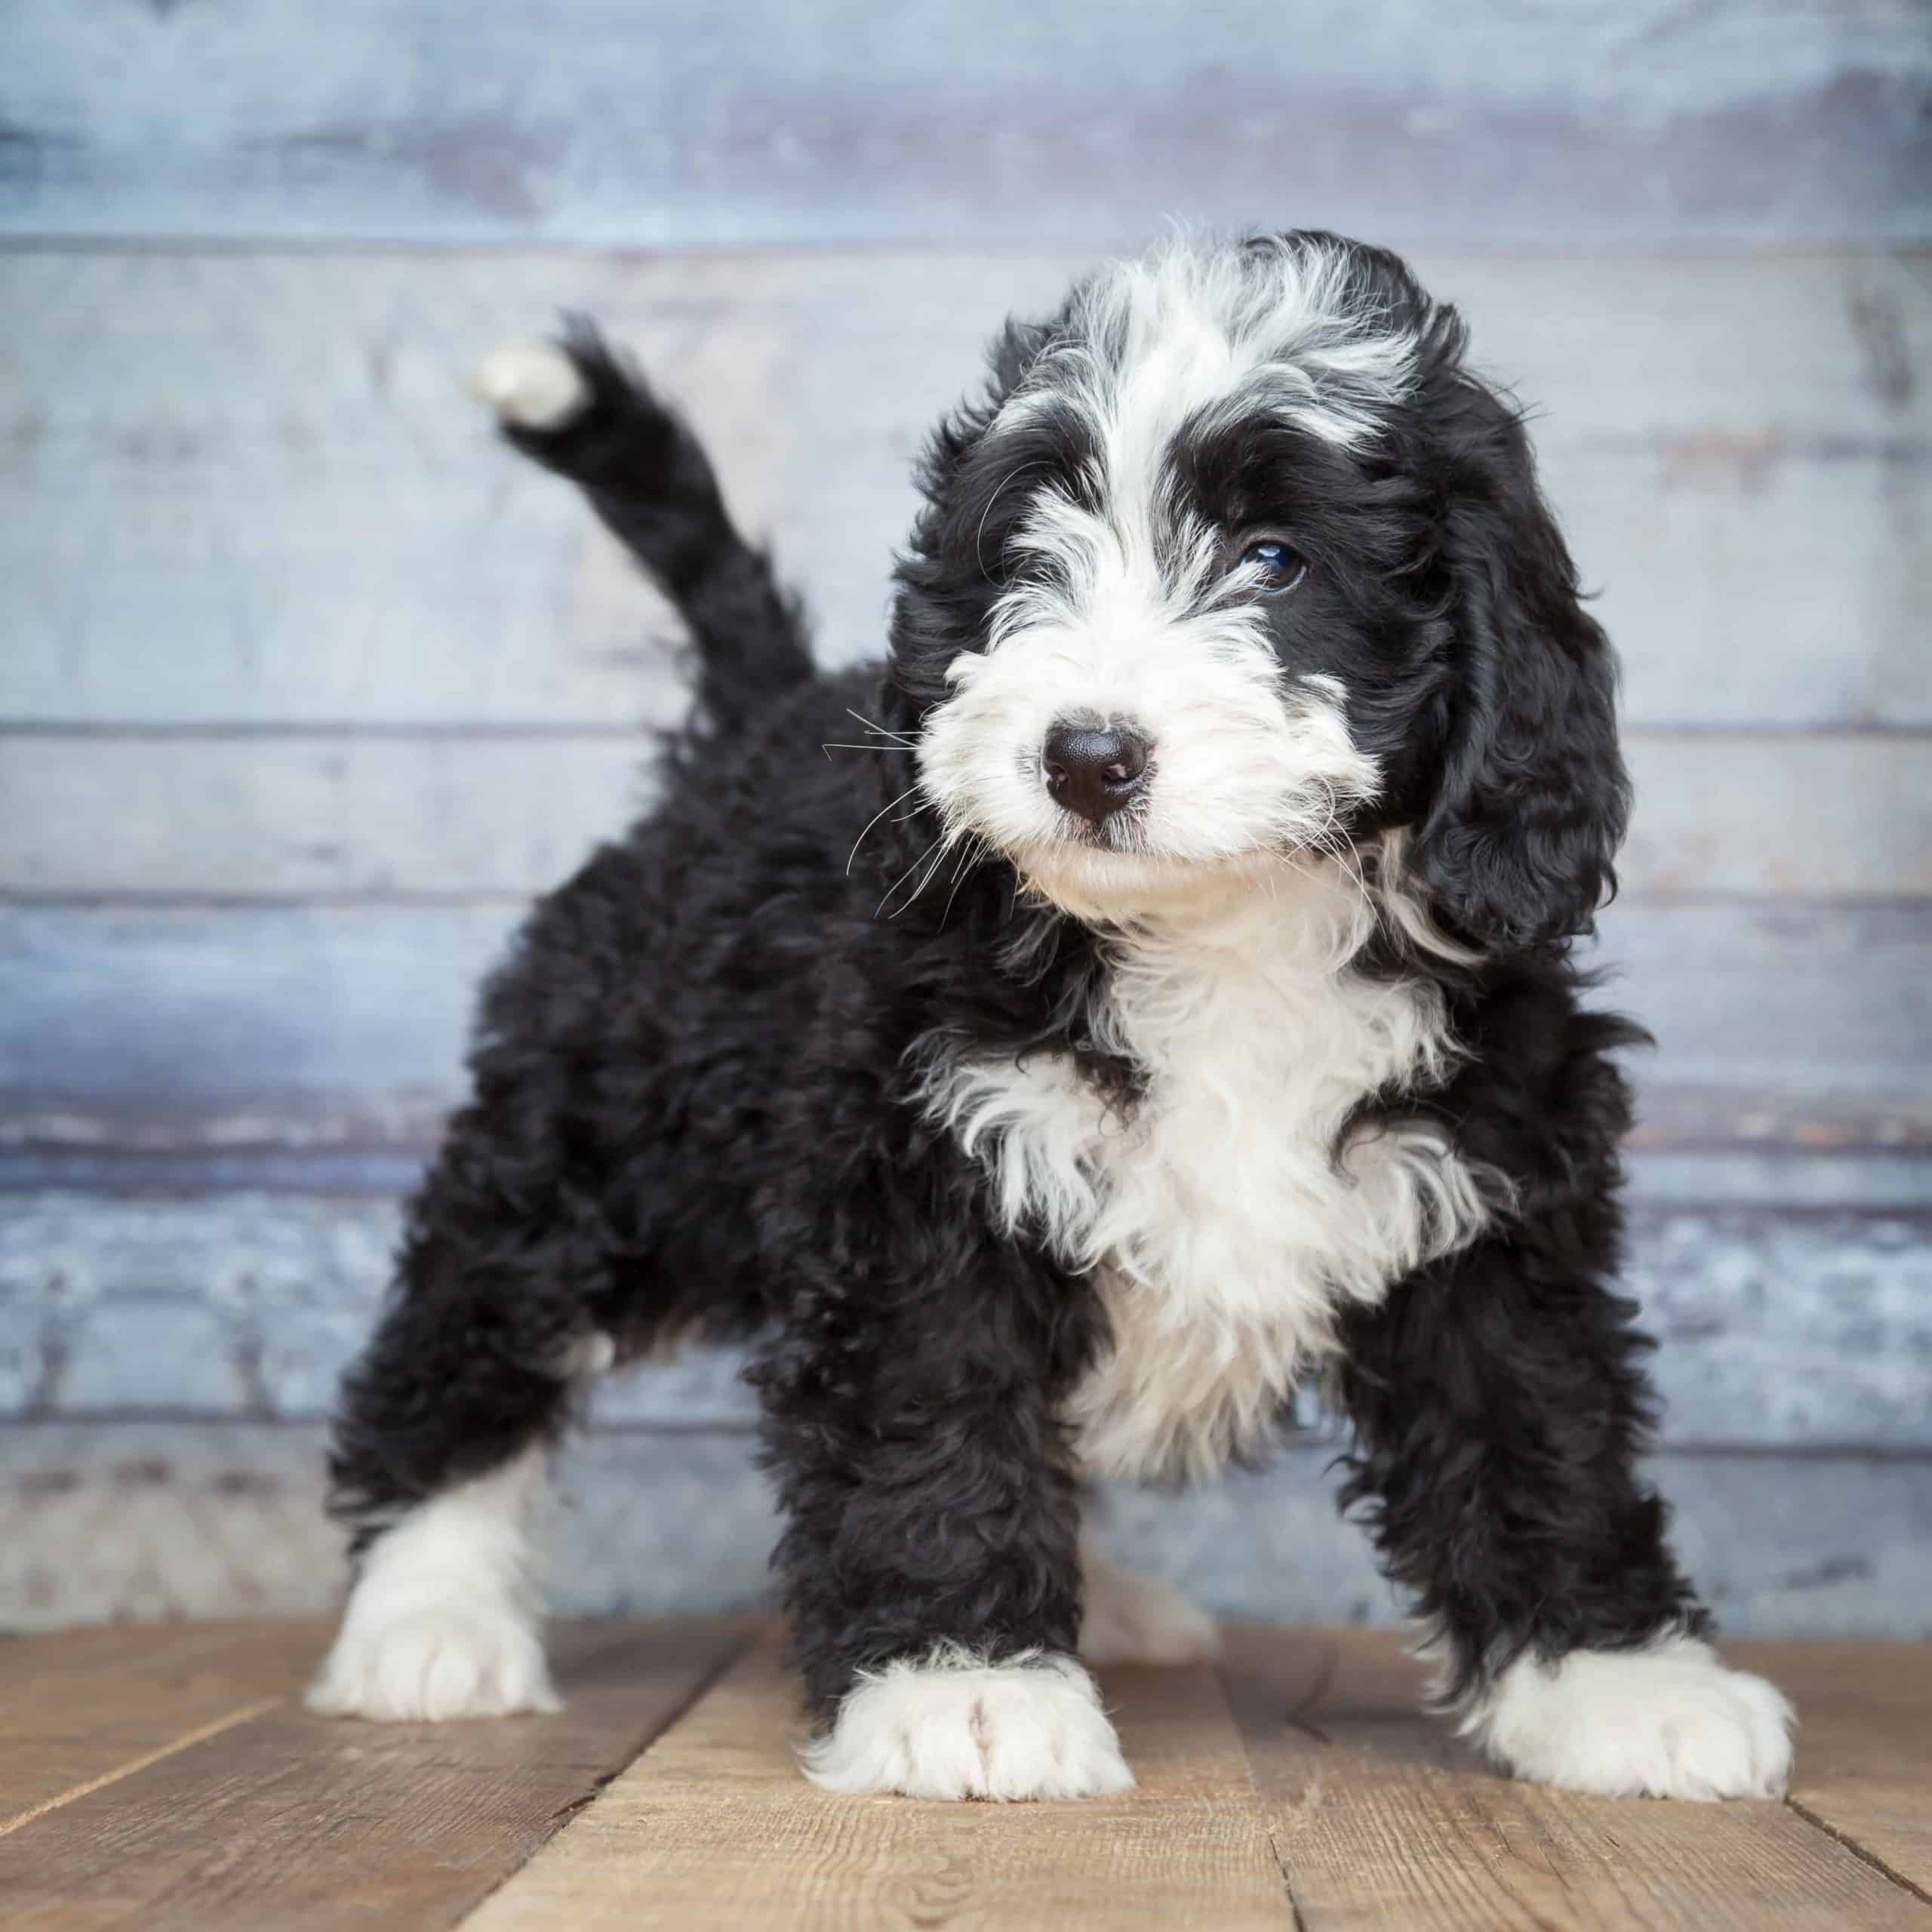 Mini-bernedoodle puppy. The mini-bernadoodle is extremely intelligent, making it easier than other breeds to train. They also are playful and need lots of exercise.